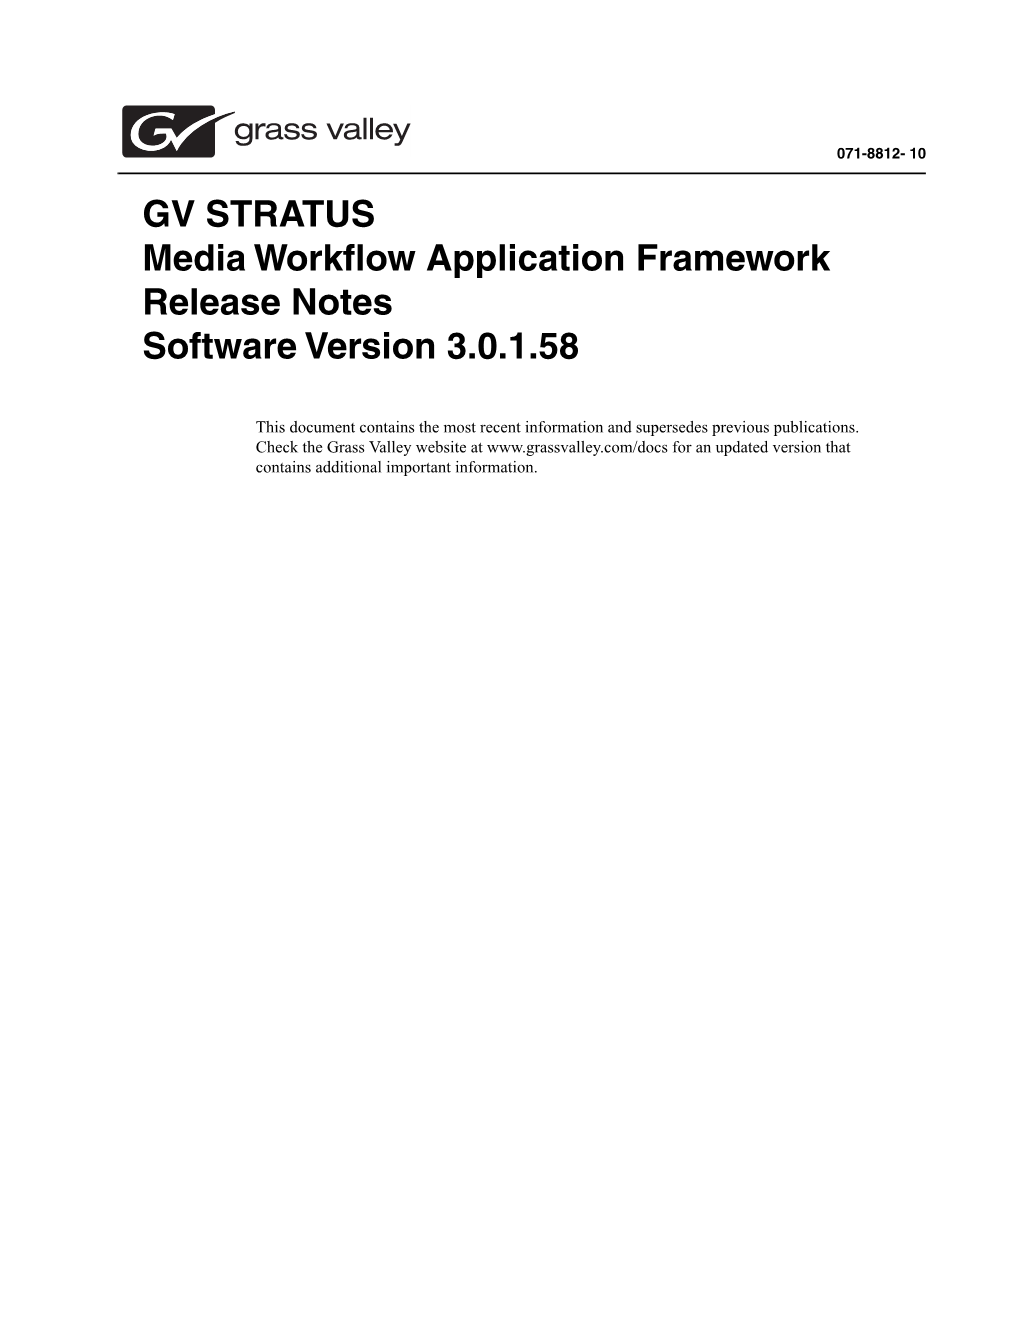 GV STRATUS Release Notes 3 Release Summary